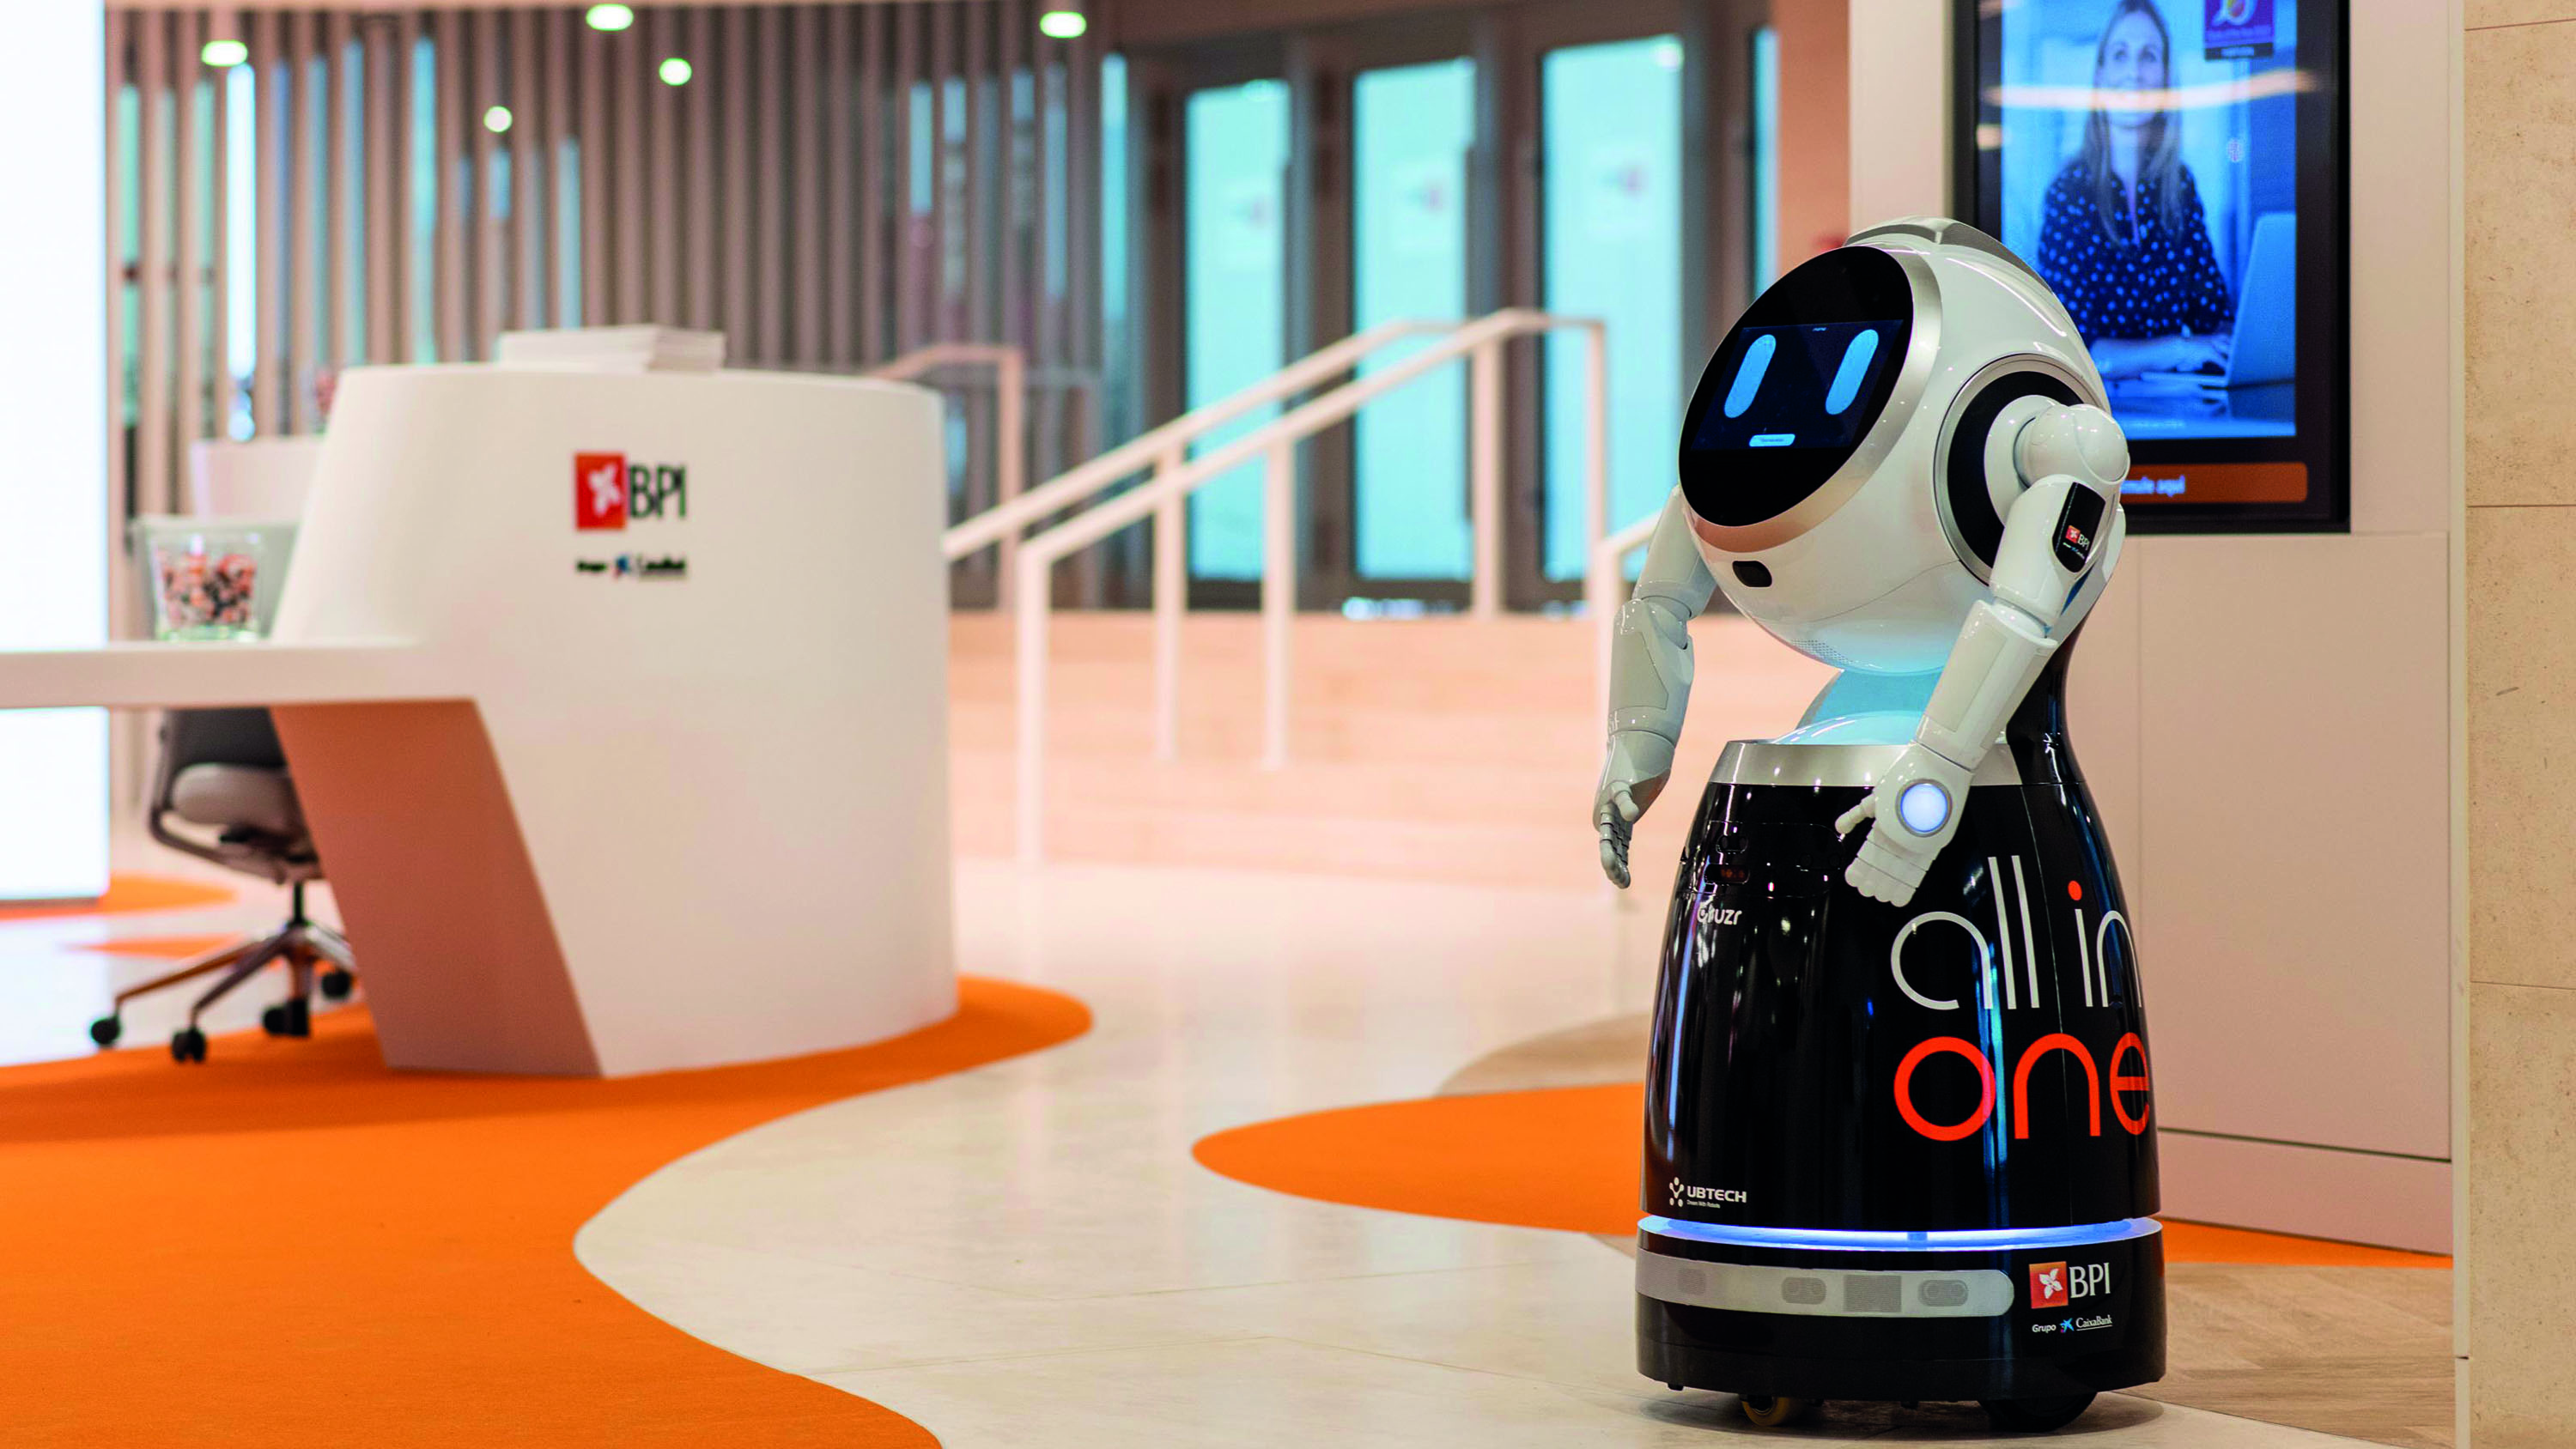 Future signs: BPI is pioneering the idea of the robot concierge